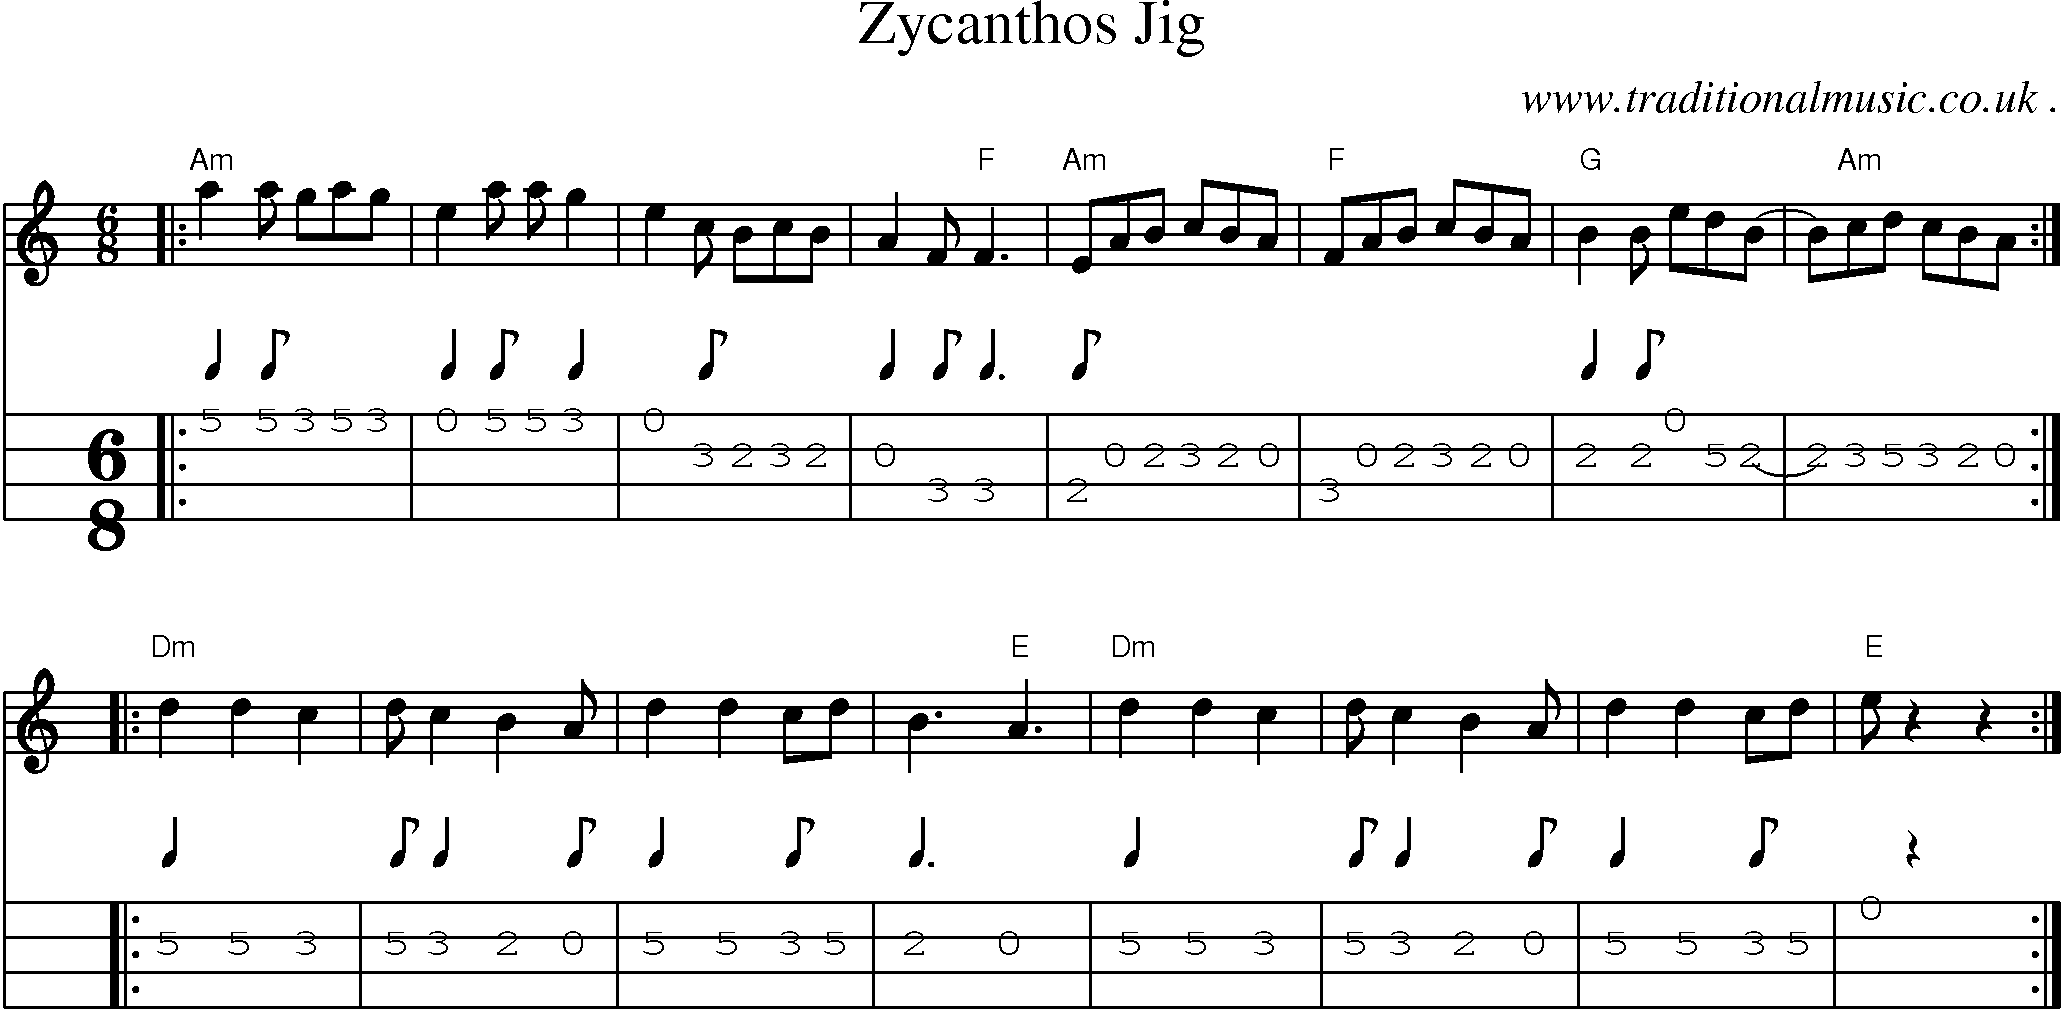 Sheet-music  score, Chords and Mandolin Tabs for Zycanthos Jig